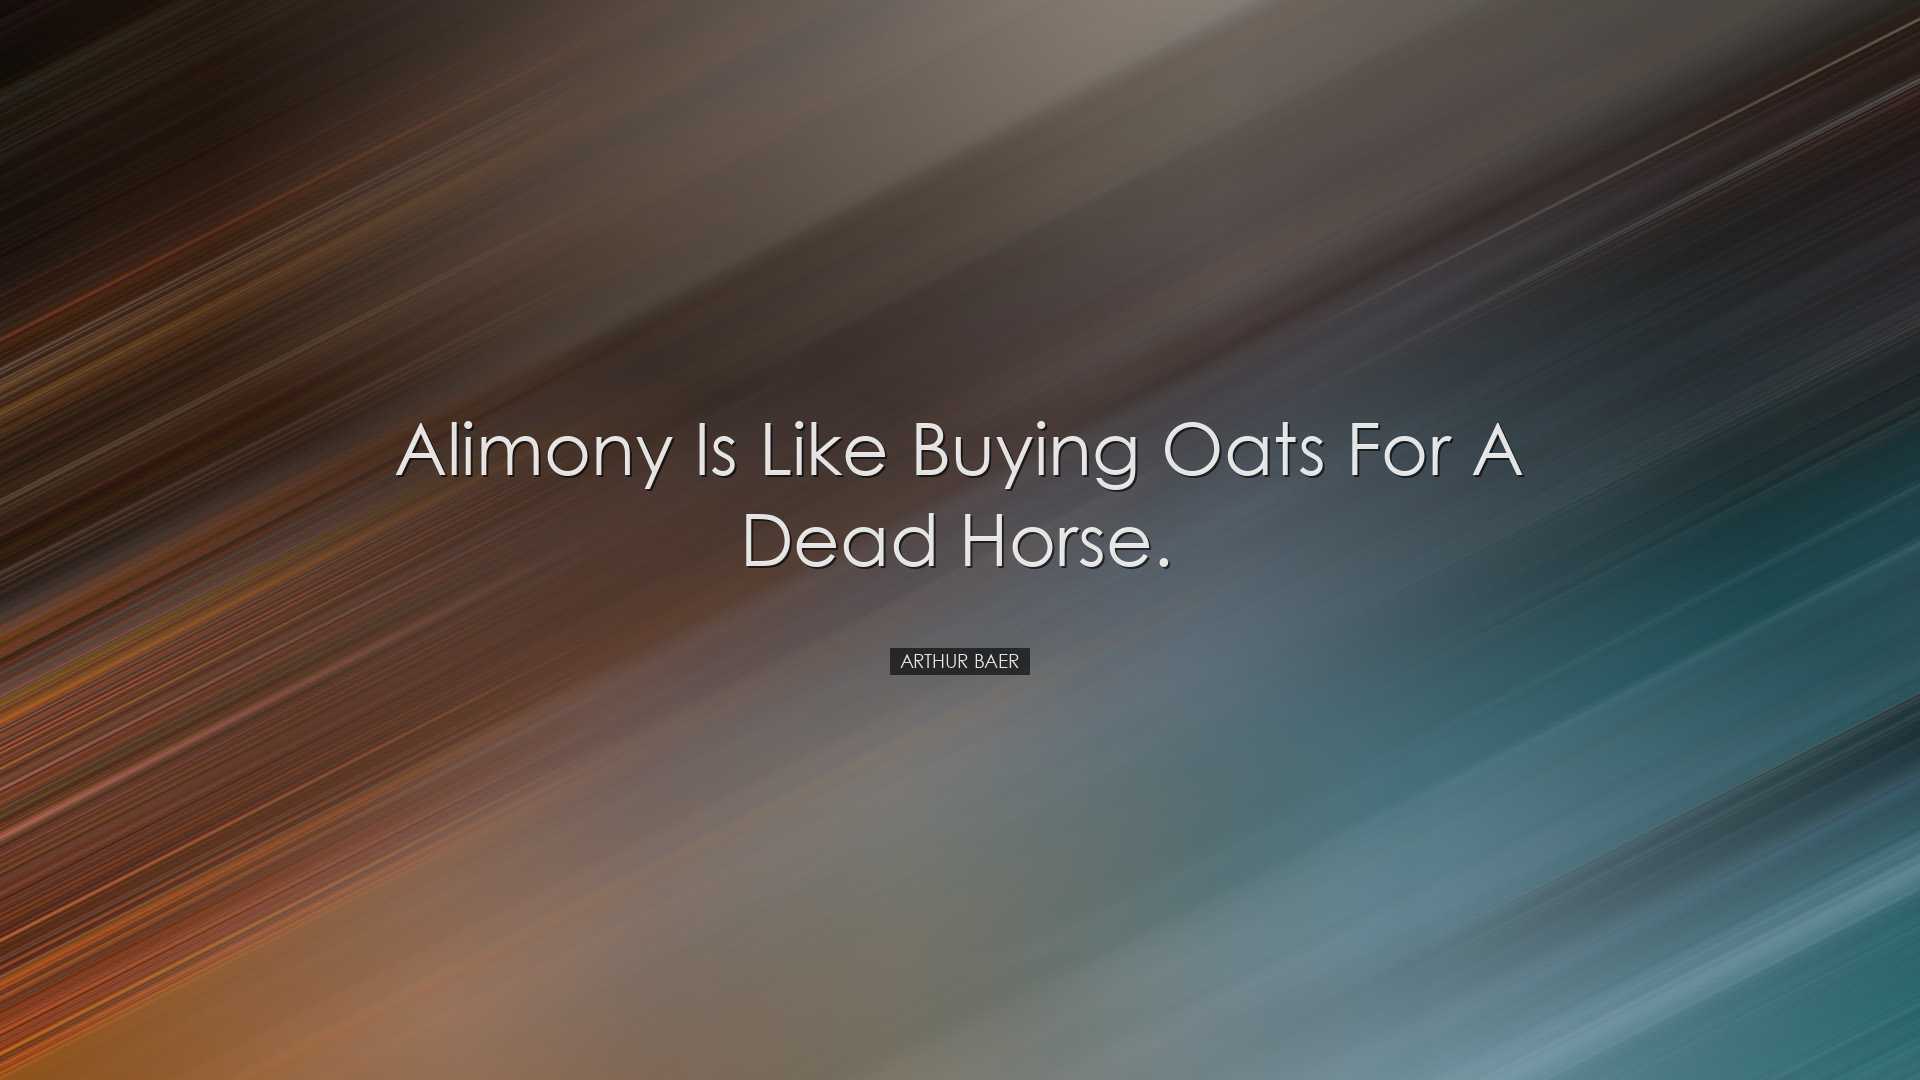 Alimony is like buying oats for a dead horse. - Arthur Baer